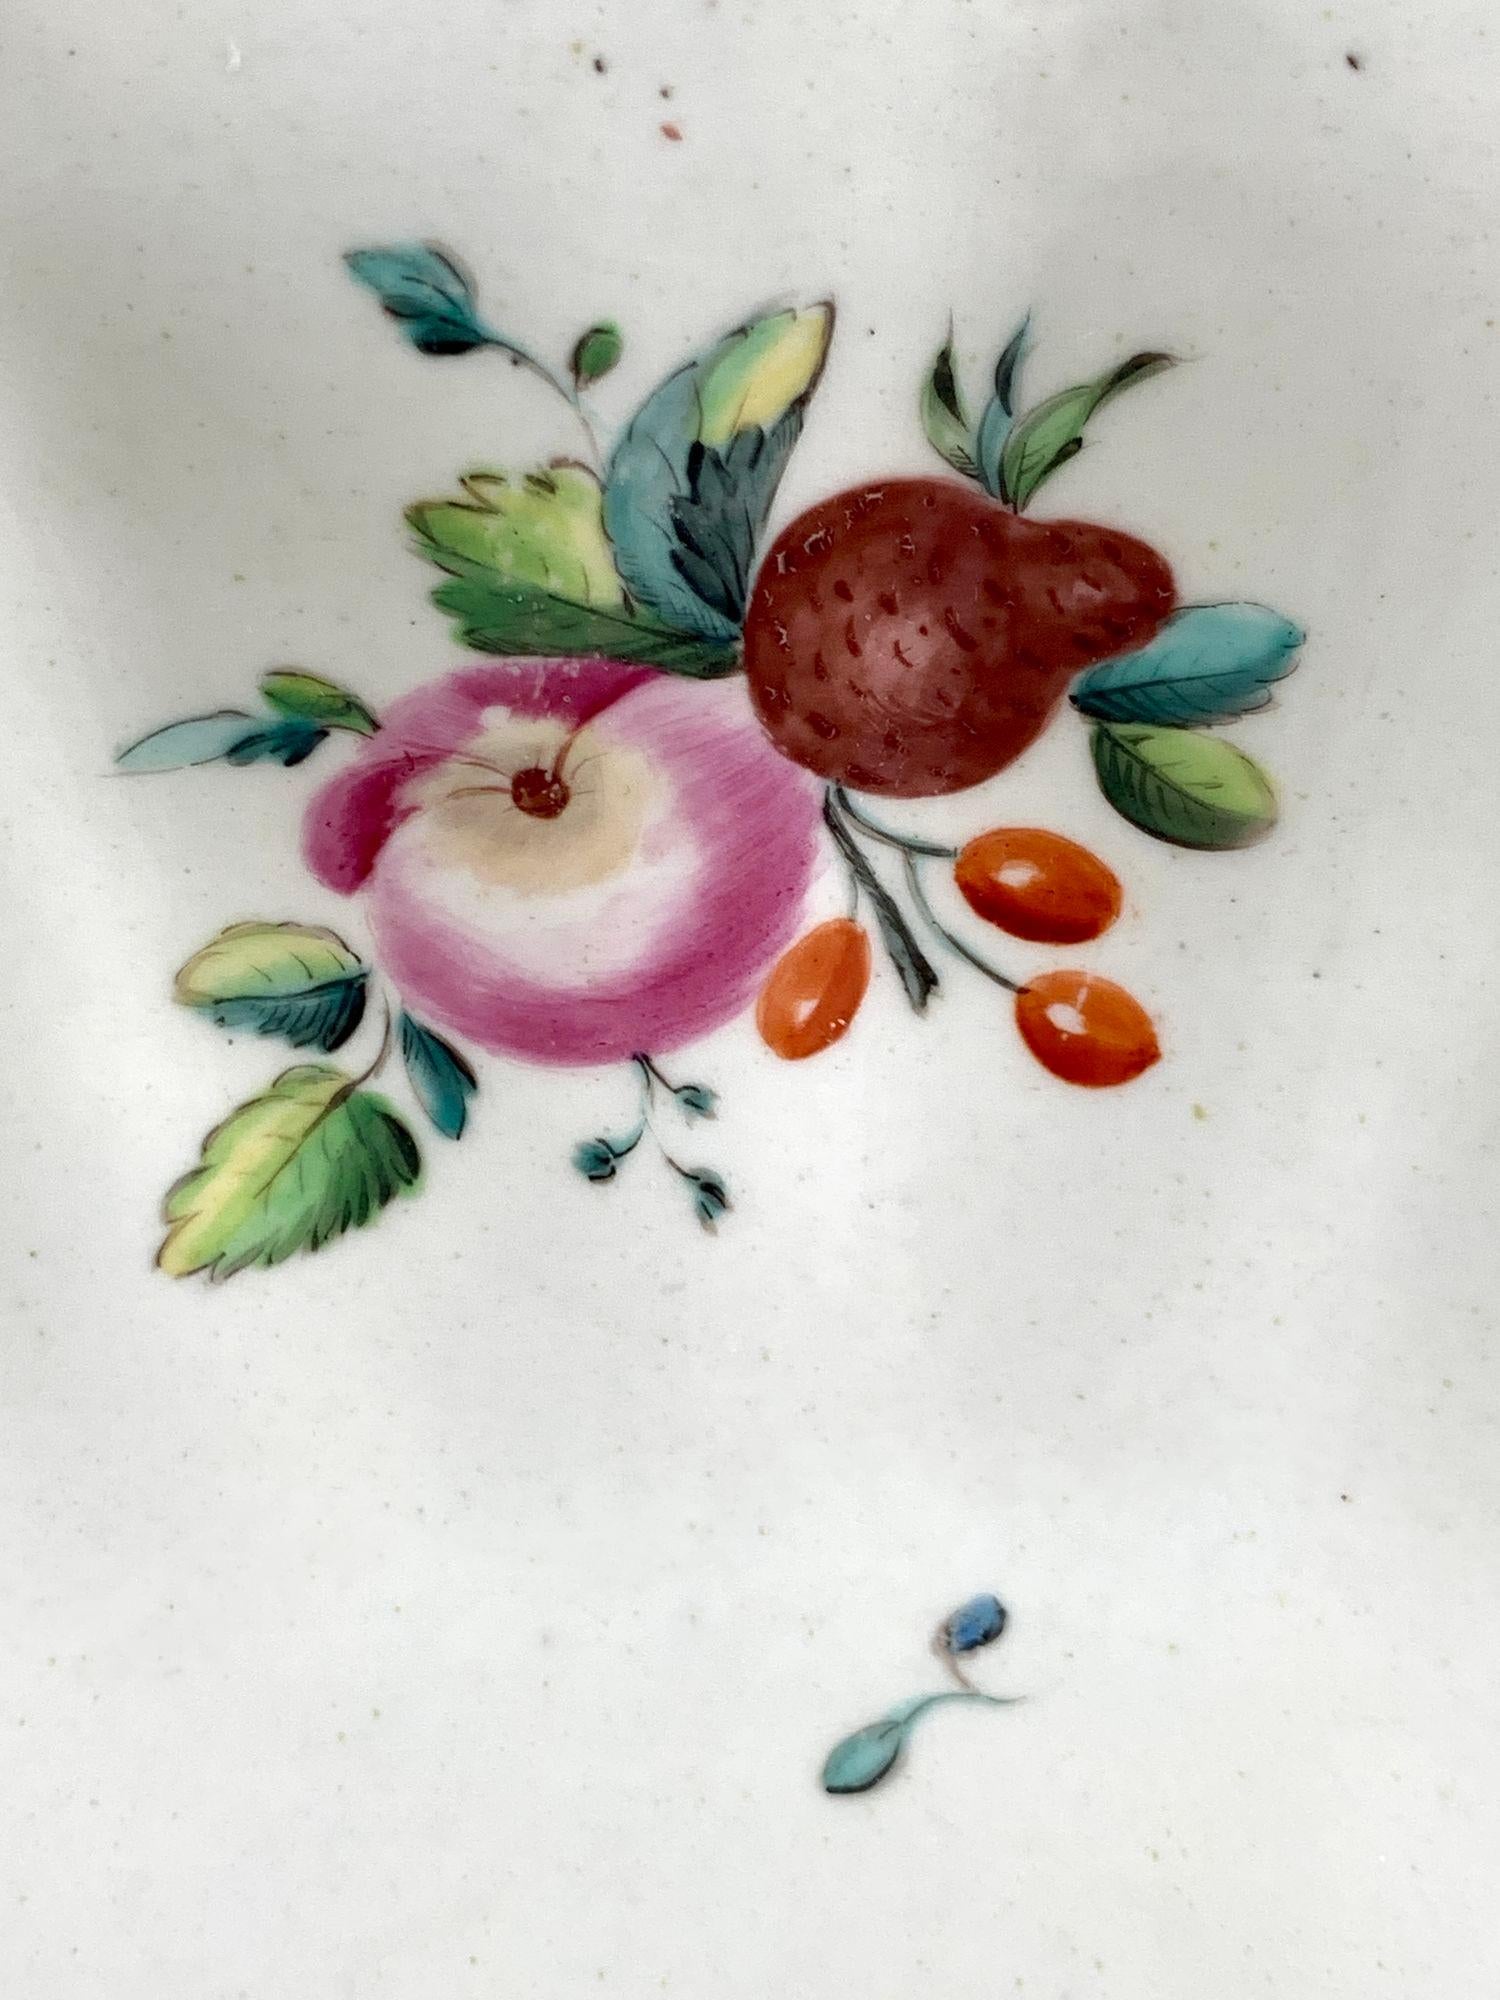 Rococo Chelsea Porcelain Oval Dish with Red Anchor C-1752-56 with Fruits and Insects For Sale